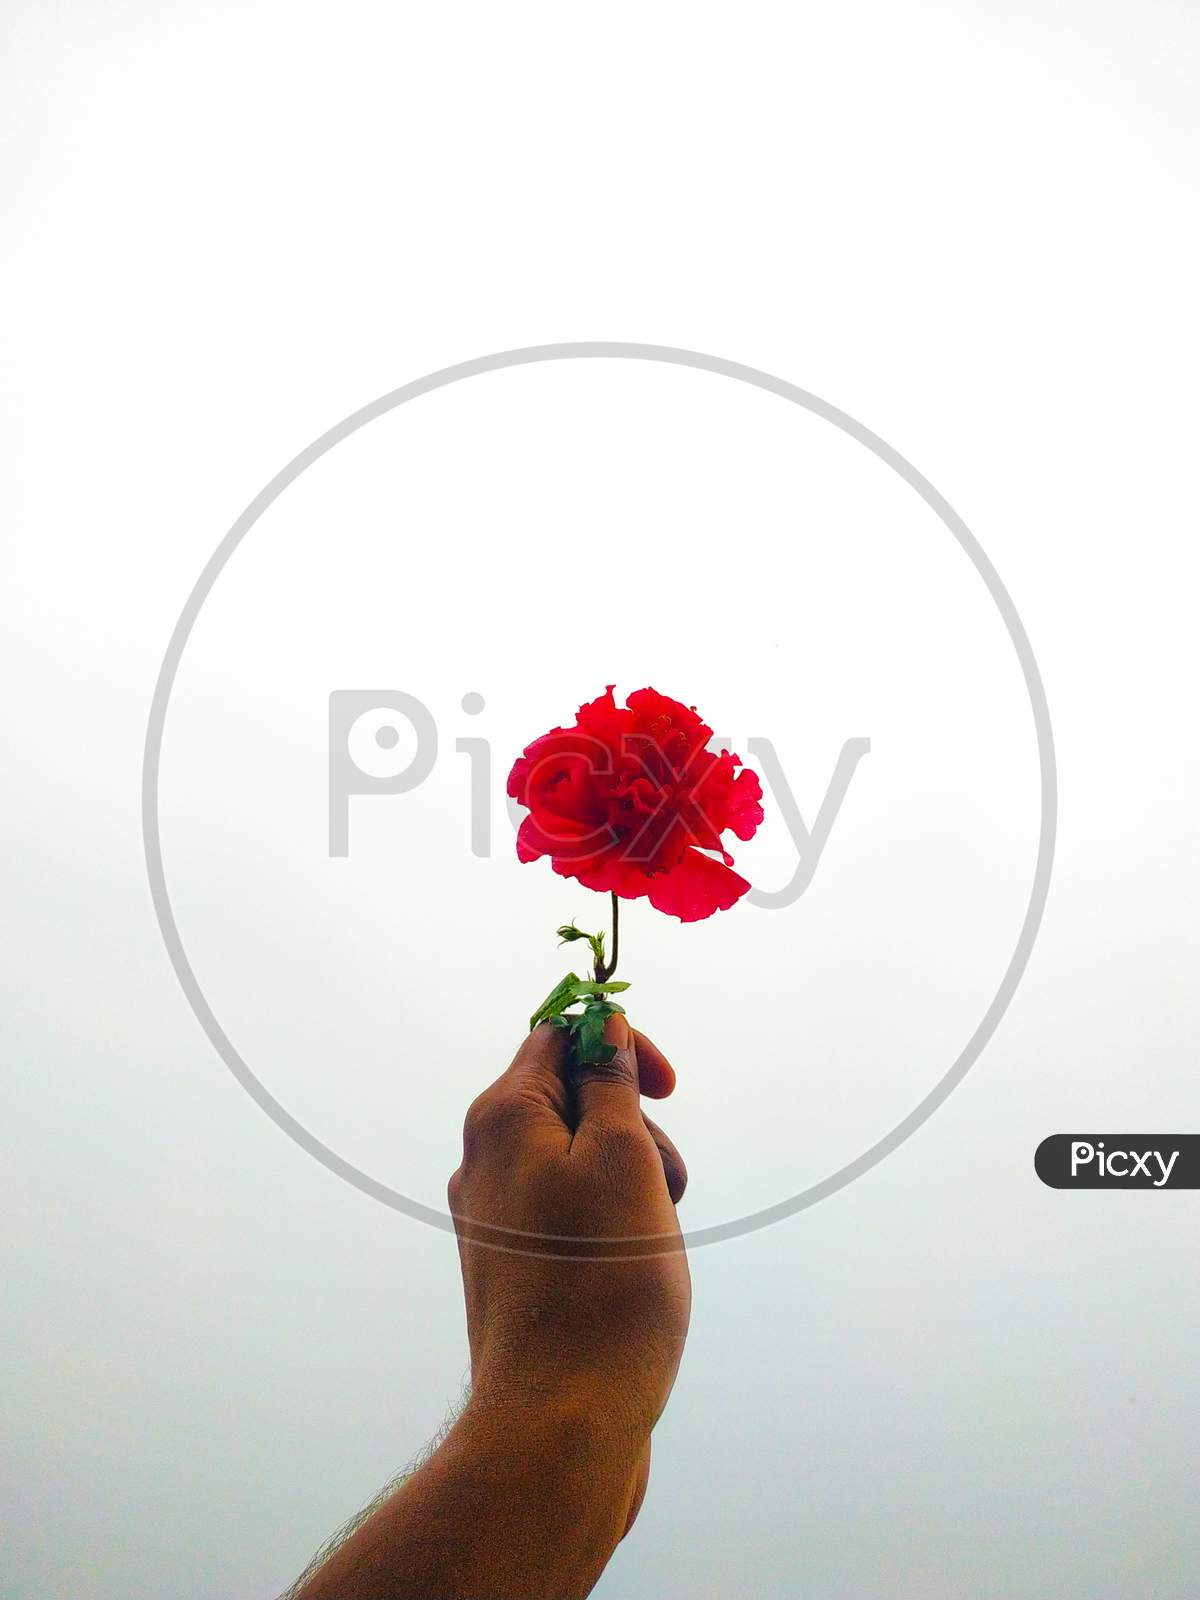 Red Flowers In The Hands Of A Boy On A White Background